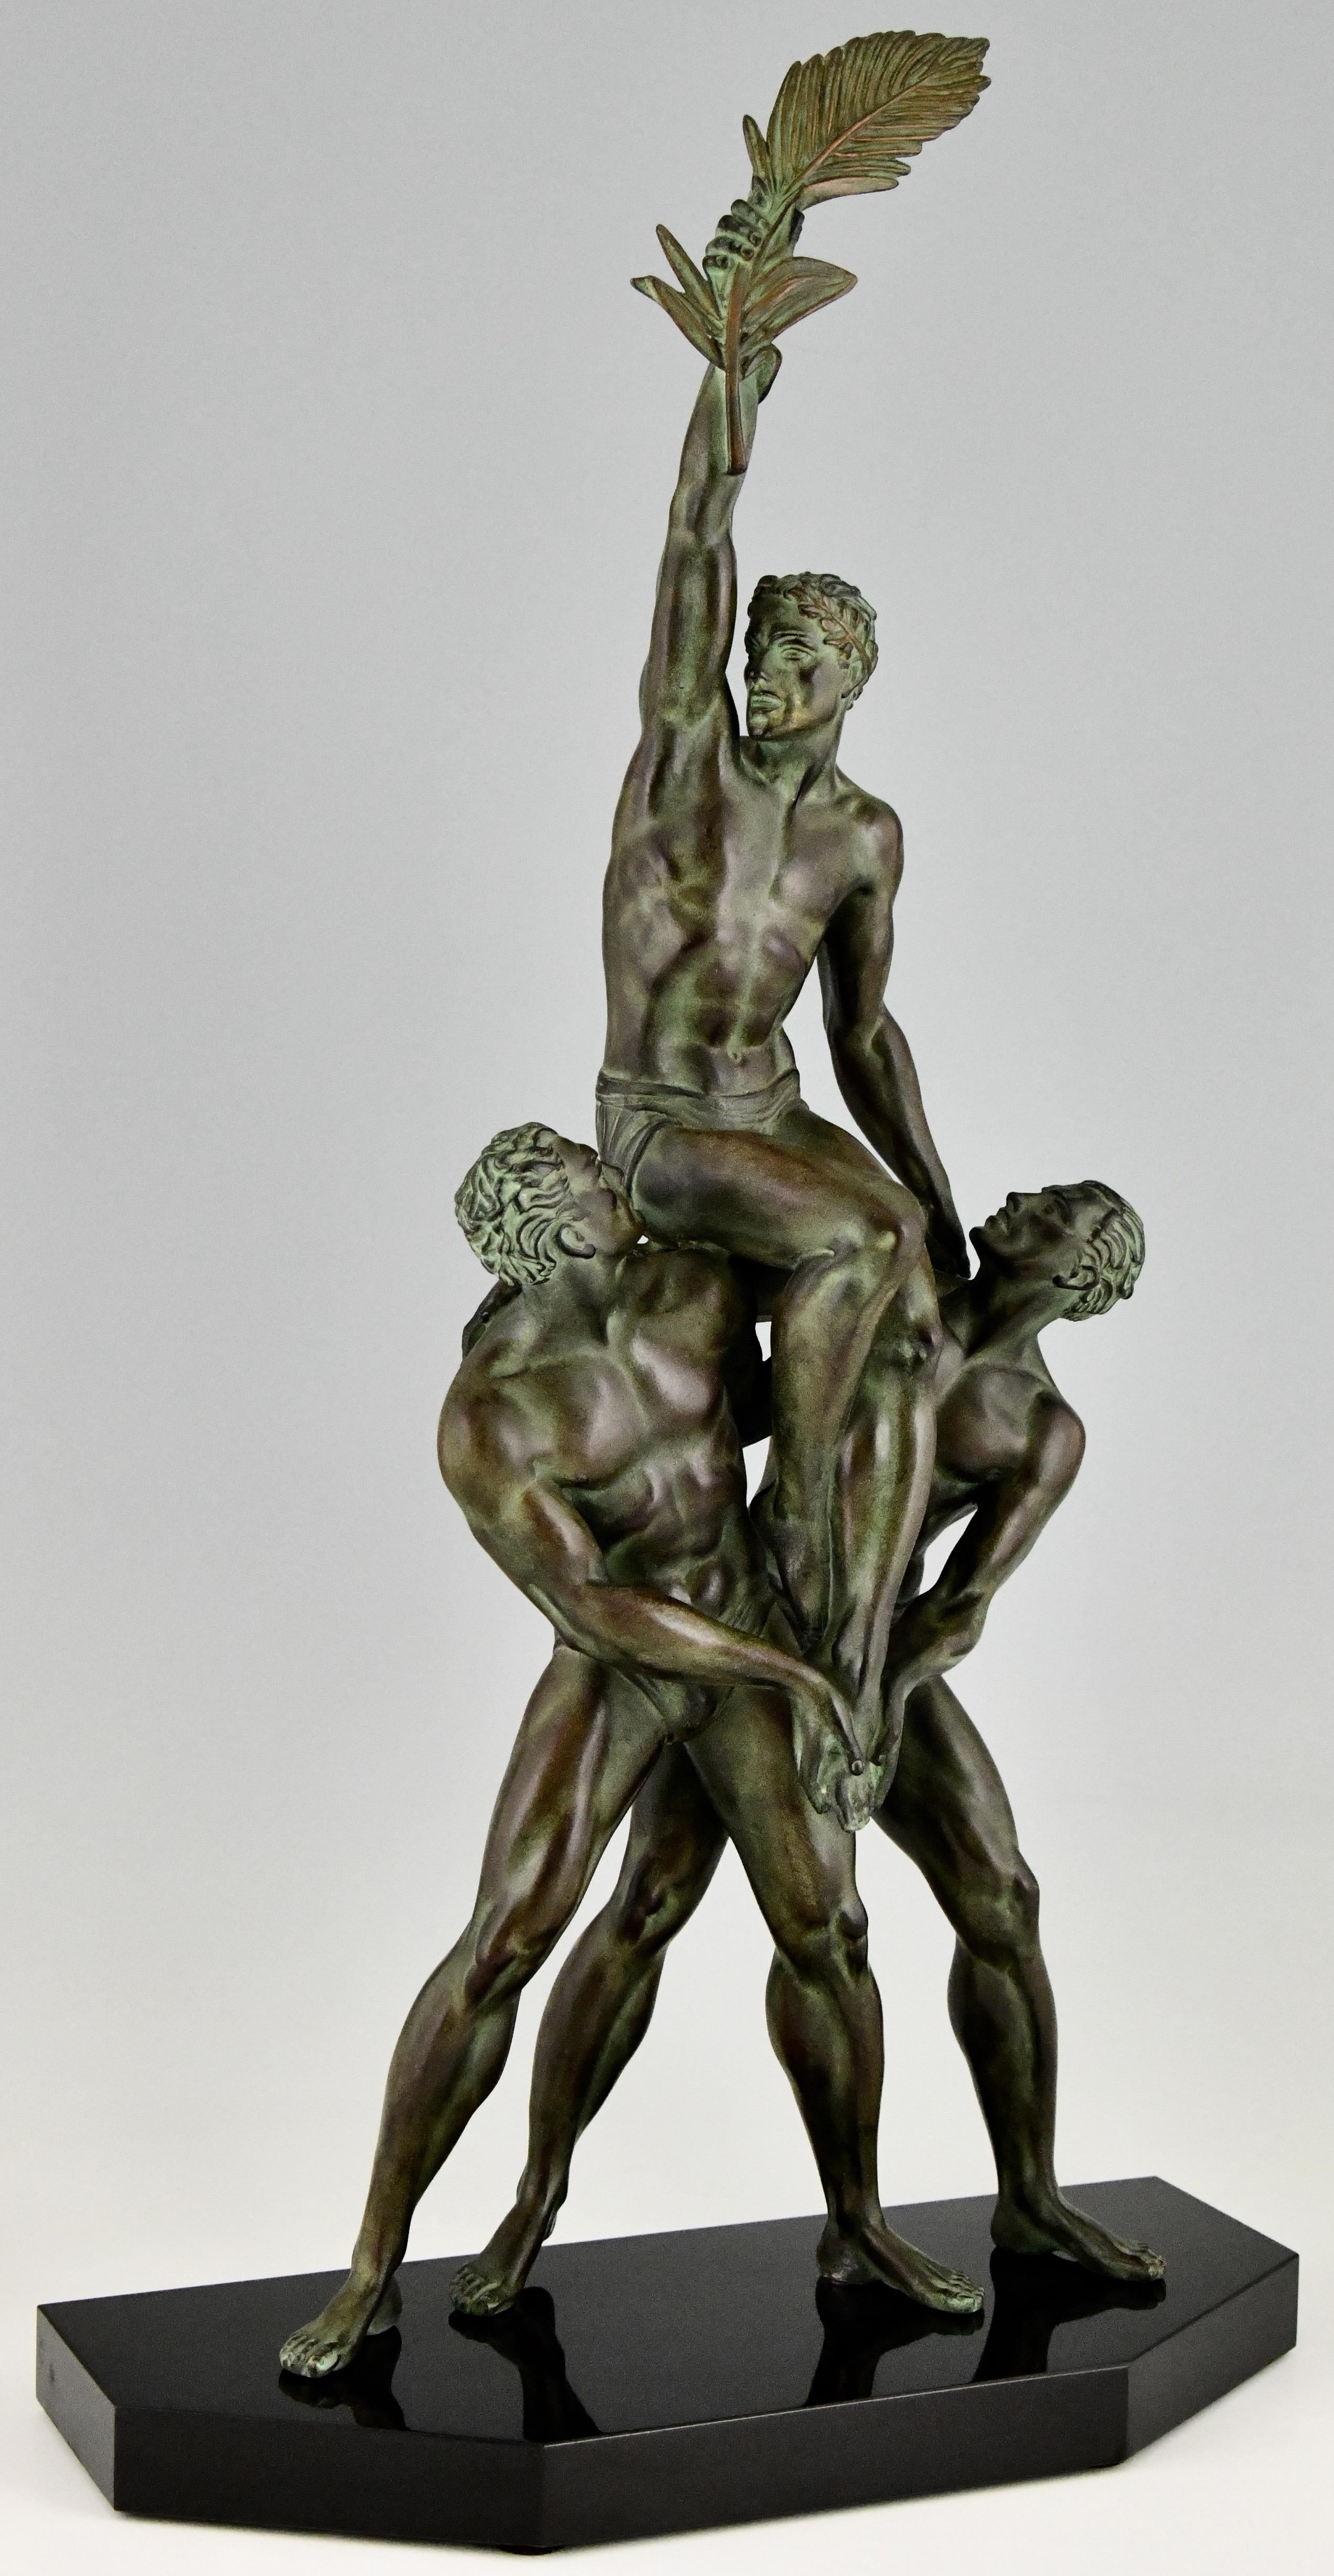 Art Deco sculpture of 3 athletes with palm leaf, Victory. Pierre Le Faguays. Cast at the Max Le Verrier foundry. France 1930. Art metal, green patina with lighter shades. Belgian Black marble. 

Literature:
Bronzes, sculptors and founders by H.